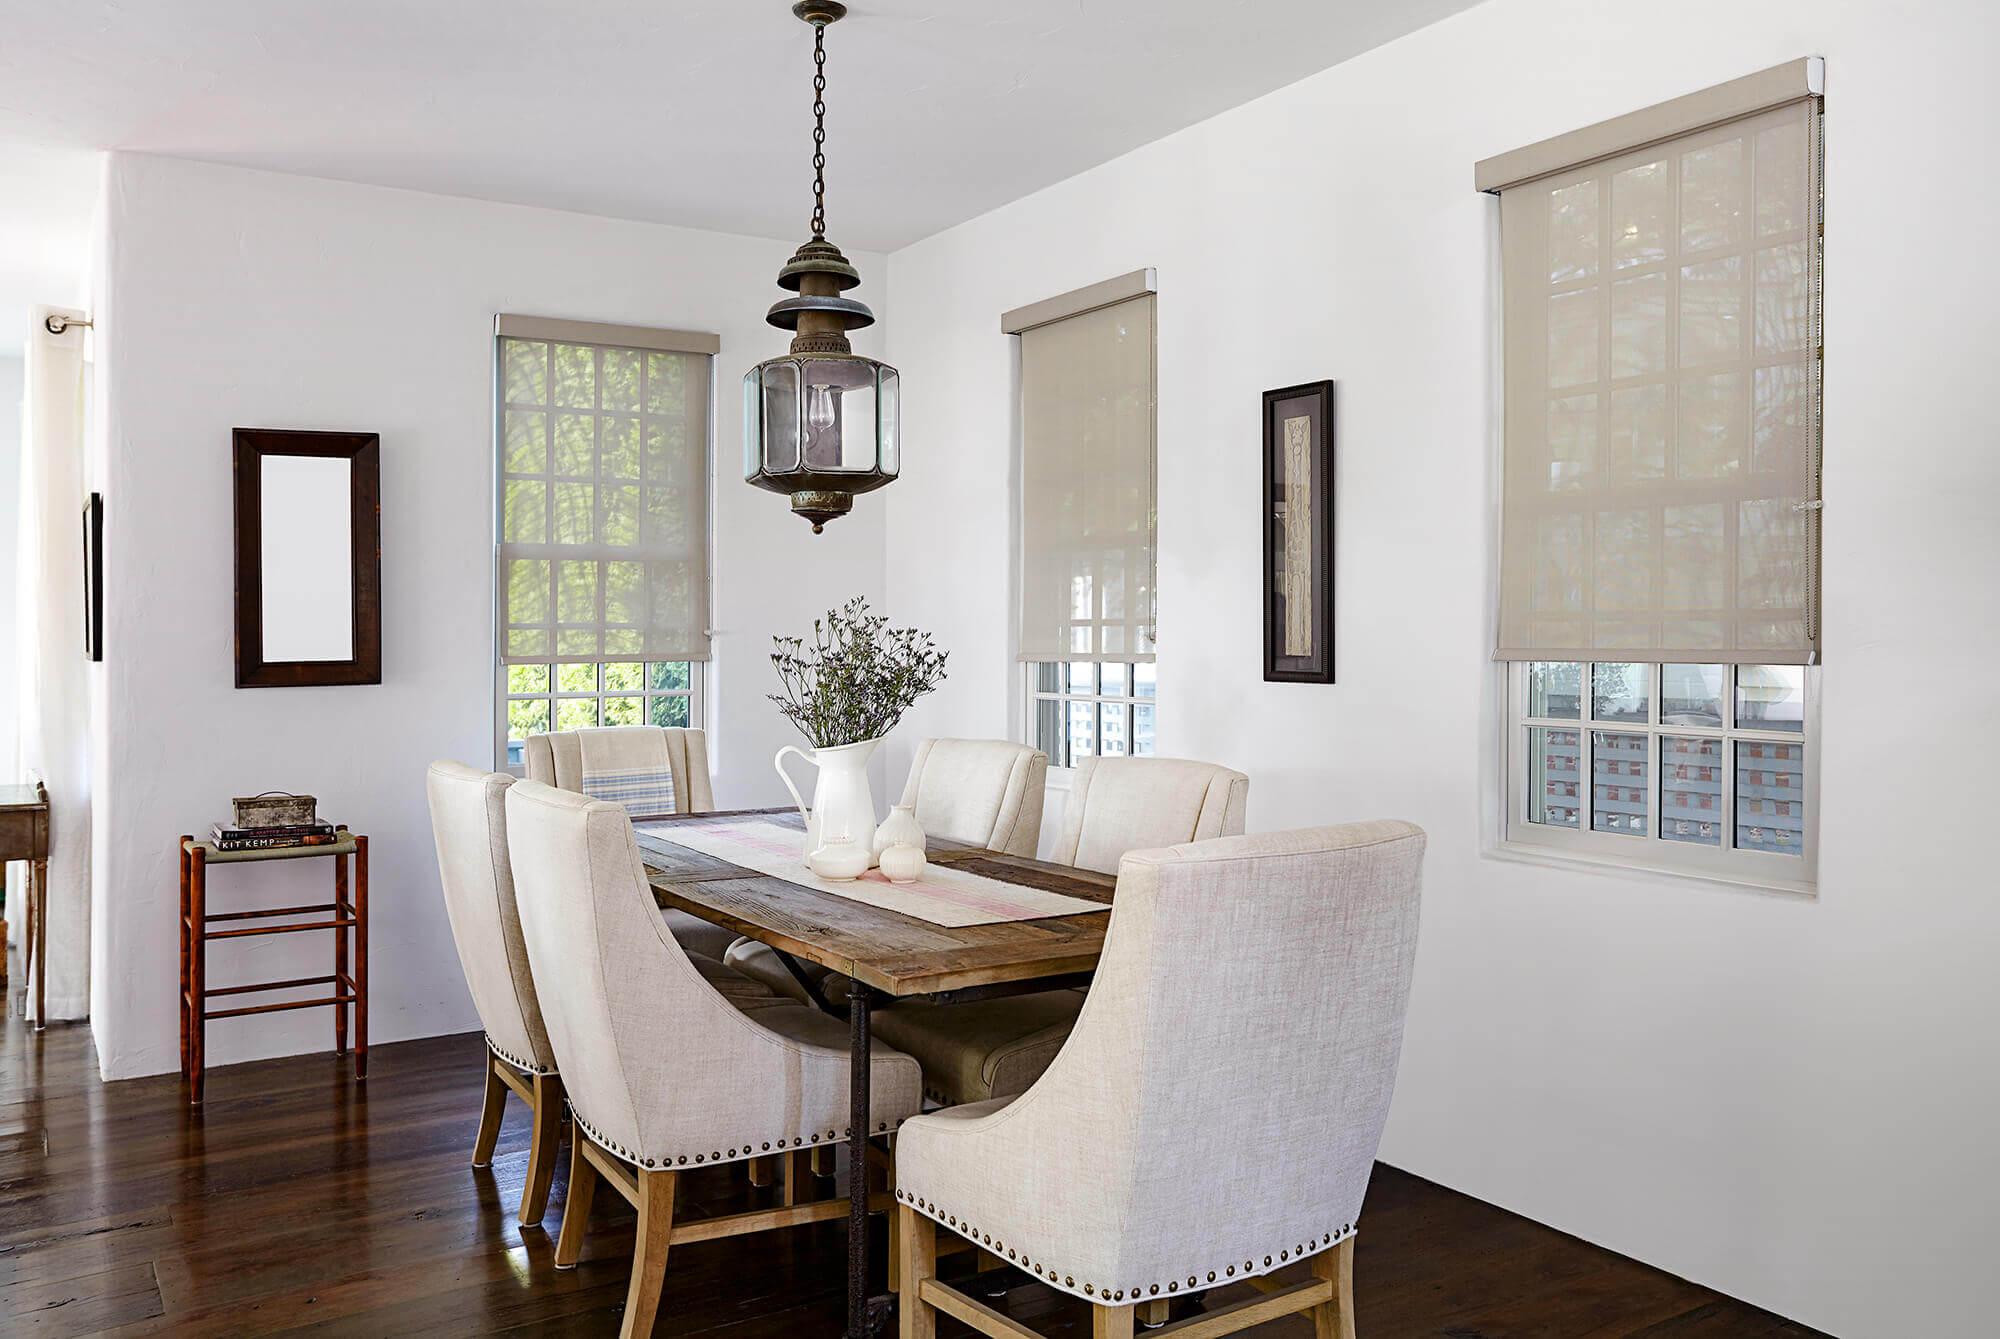 The modern dining room with a lantern looks more cultured with the addition of motorized beige sun shades.